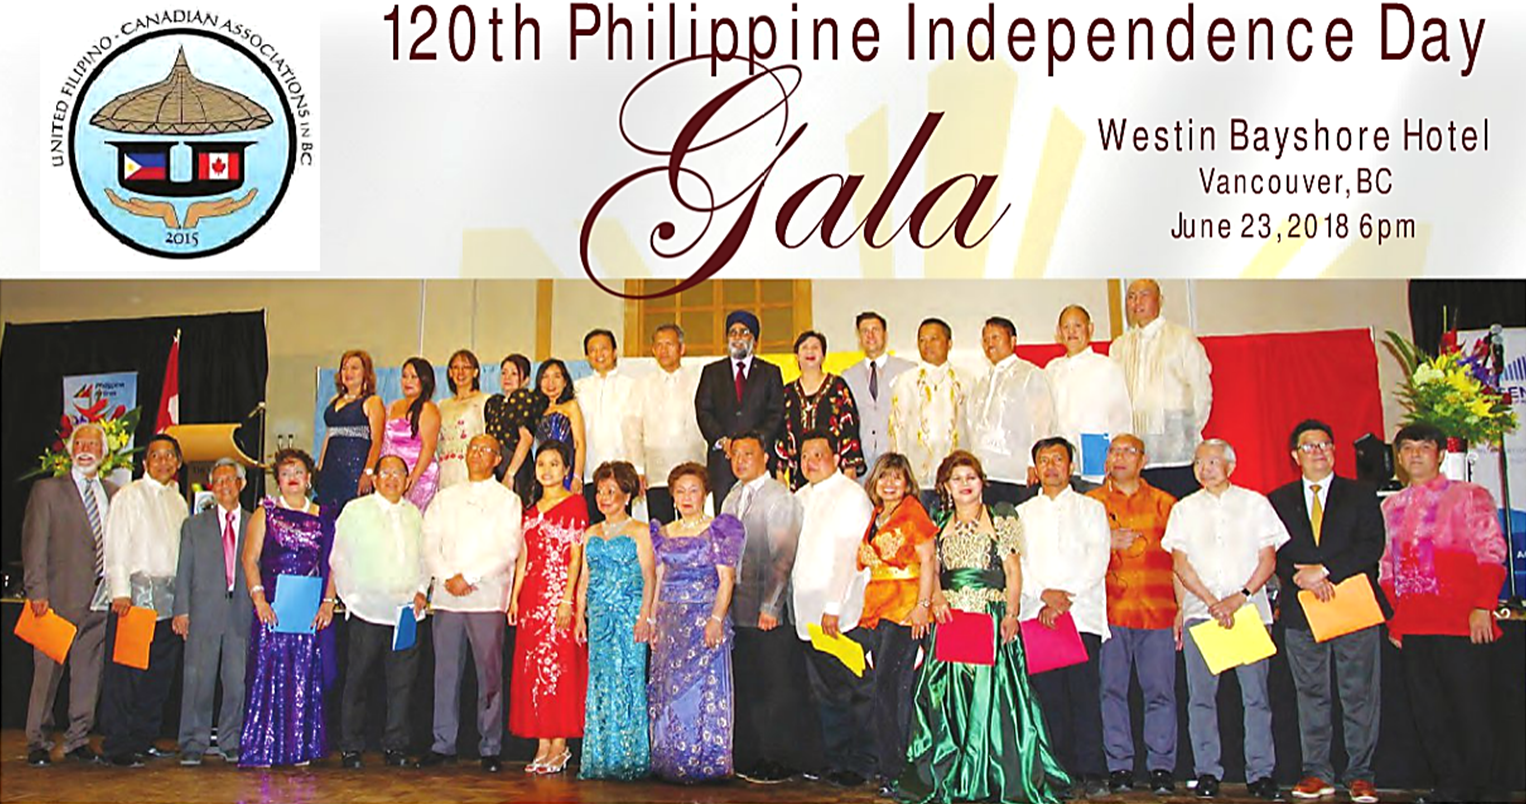 120th Philippine Independence Day Gala